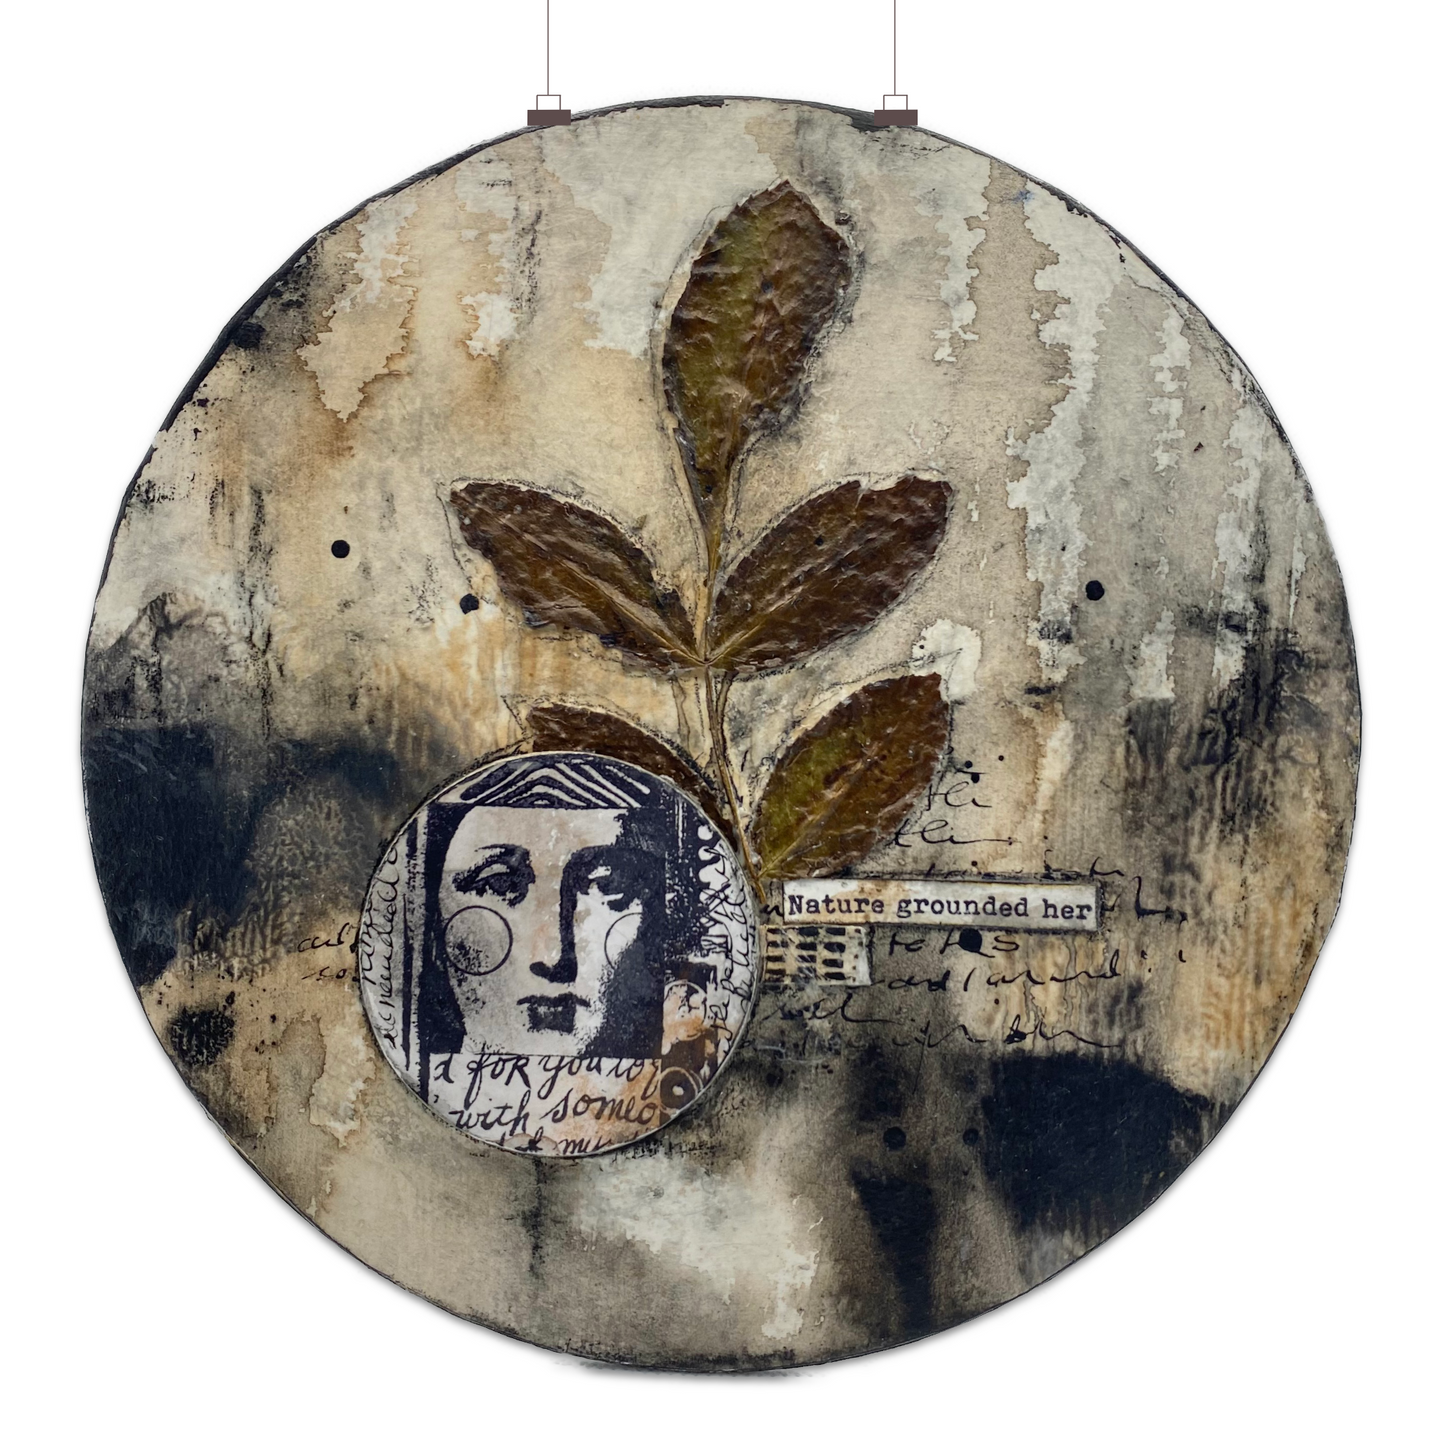 Nature Grounded Her 8” on MDF Round Wall Art